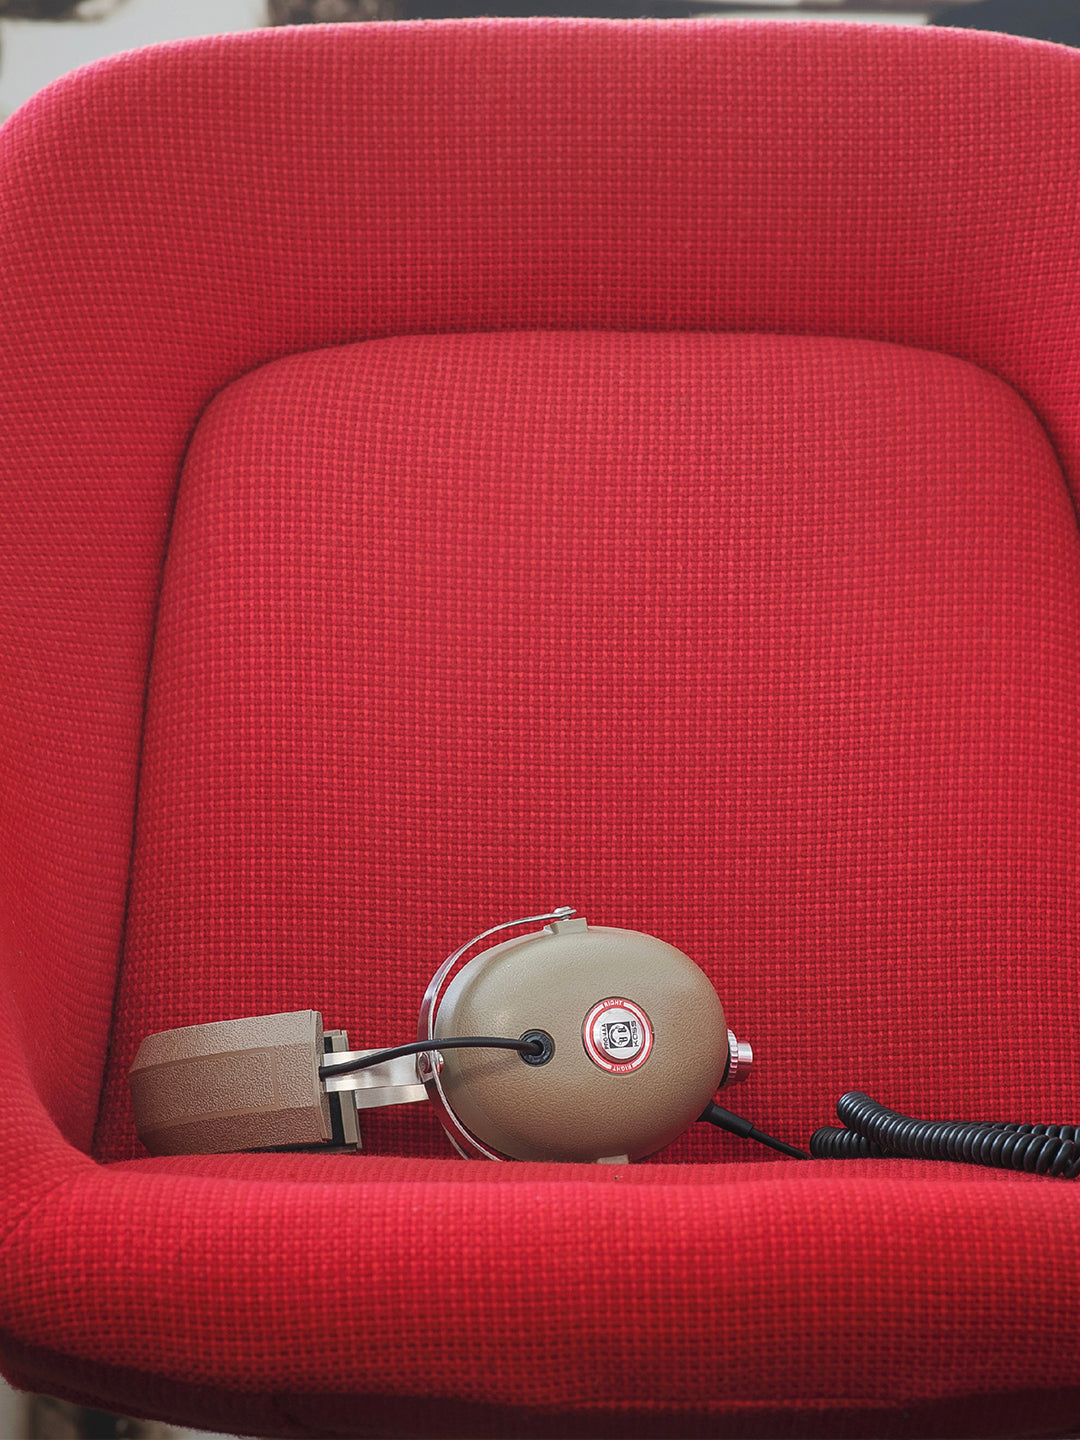 Koss Pro4aa on red vintage tweed chair 